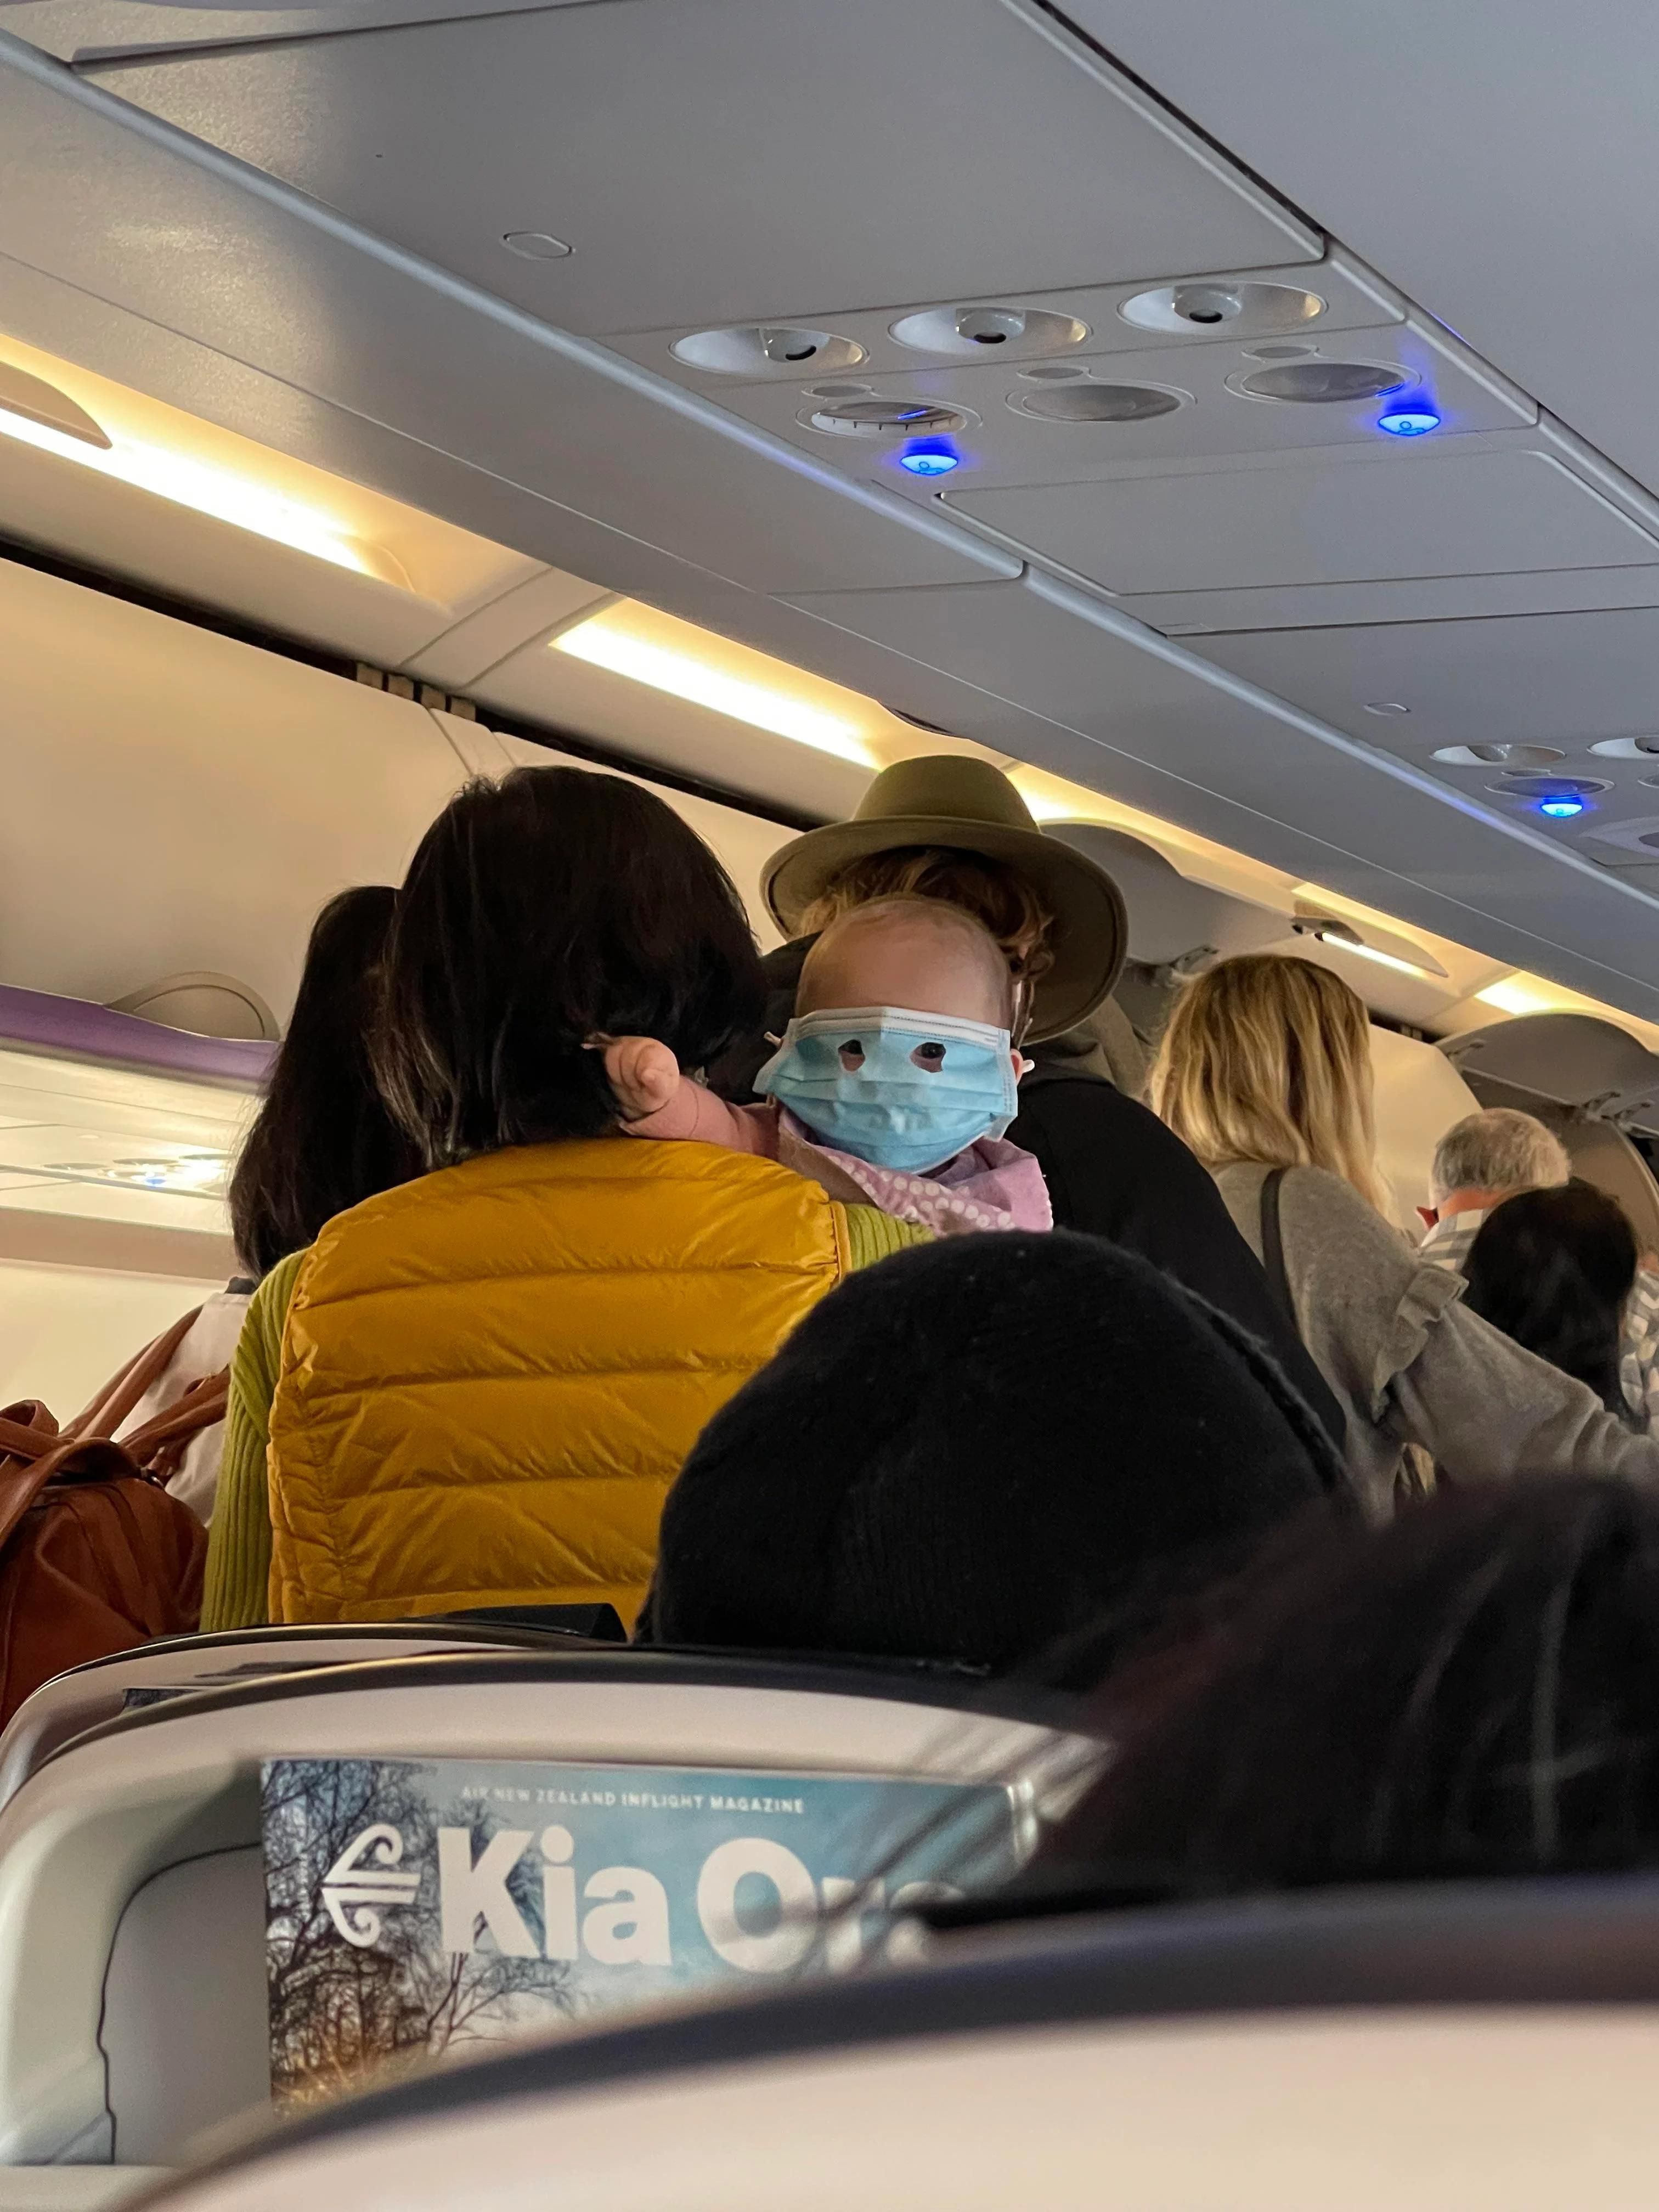 "No one cared who I was until I put on the mask" - Bane, pictured highjacking a flight, 2012